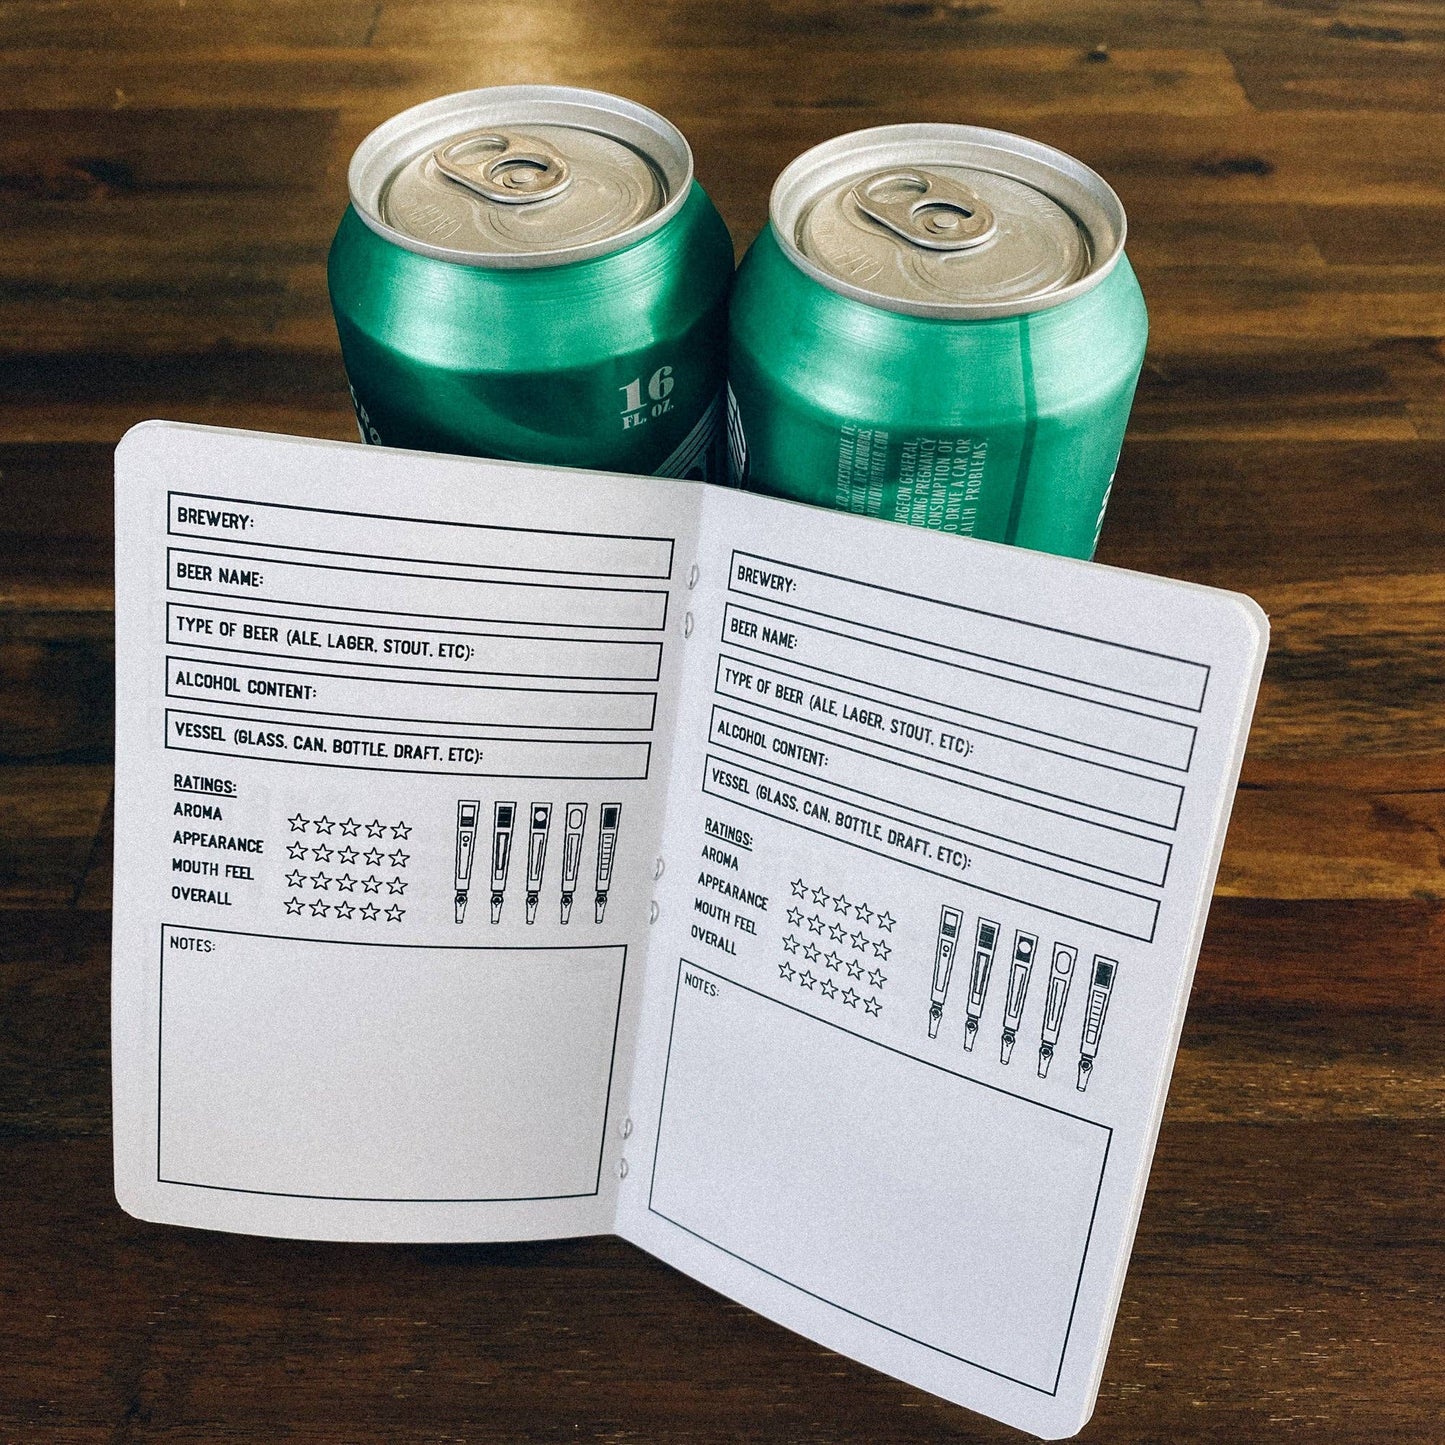 Beer Log Book - Two 20-page books